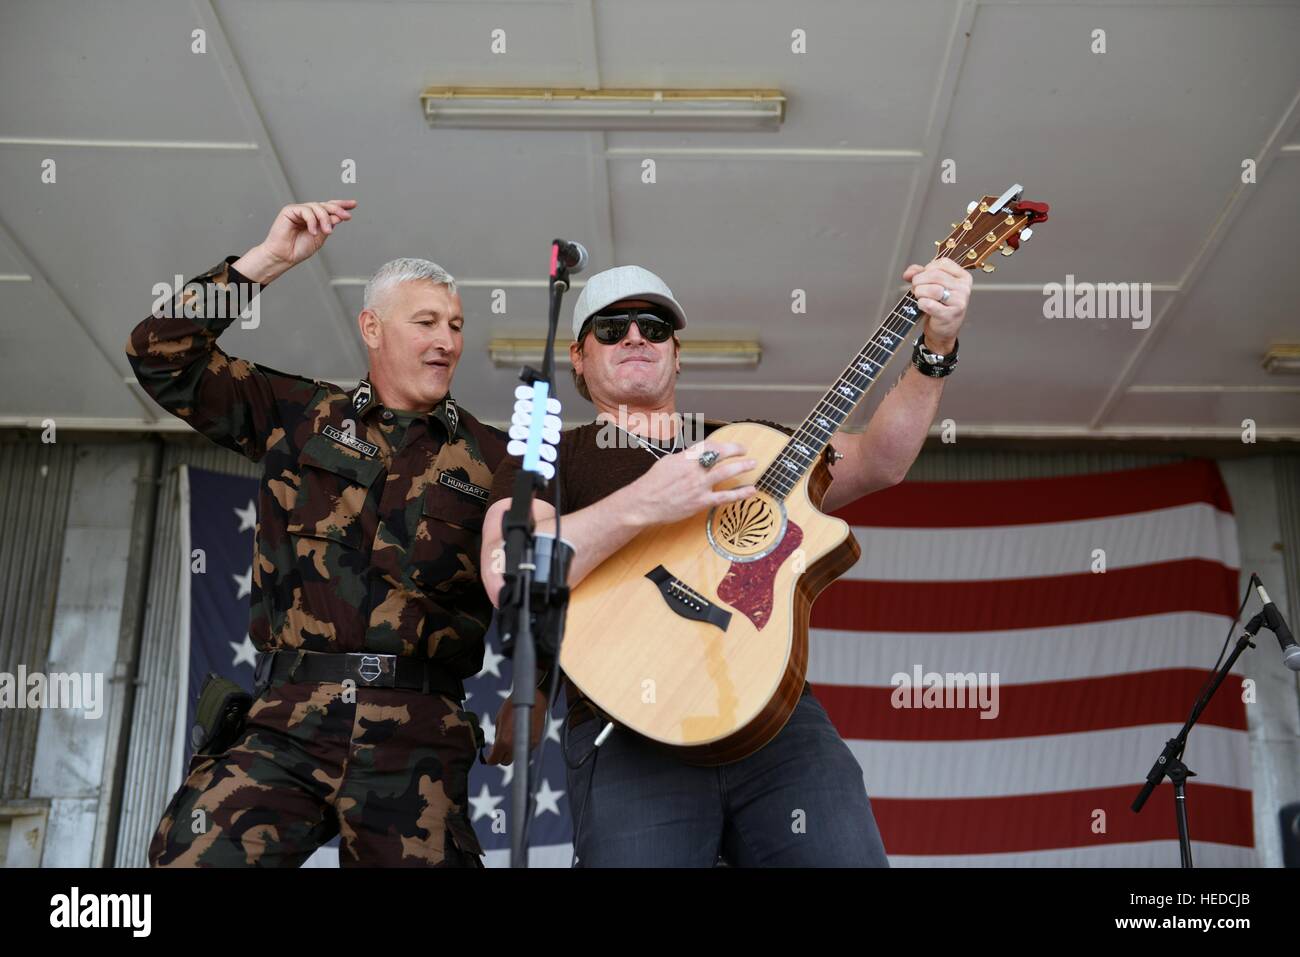 A Hungarian soldier joins in onstage with country music singer Jerrod Niemann as he performs for U.S. troops at a National Guard USO Tour May 18, 2016 in Kuwait. Stock Photo